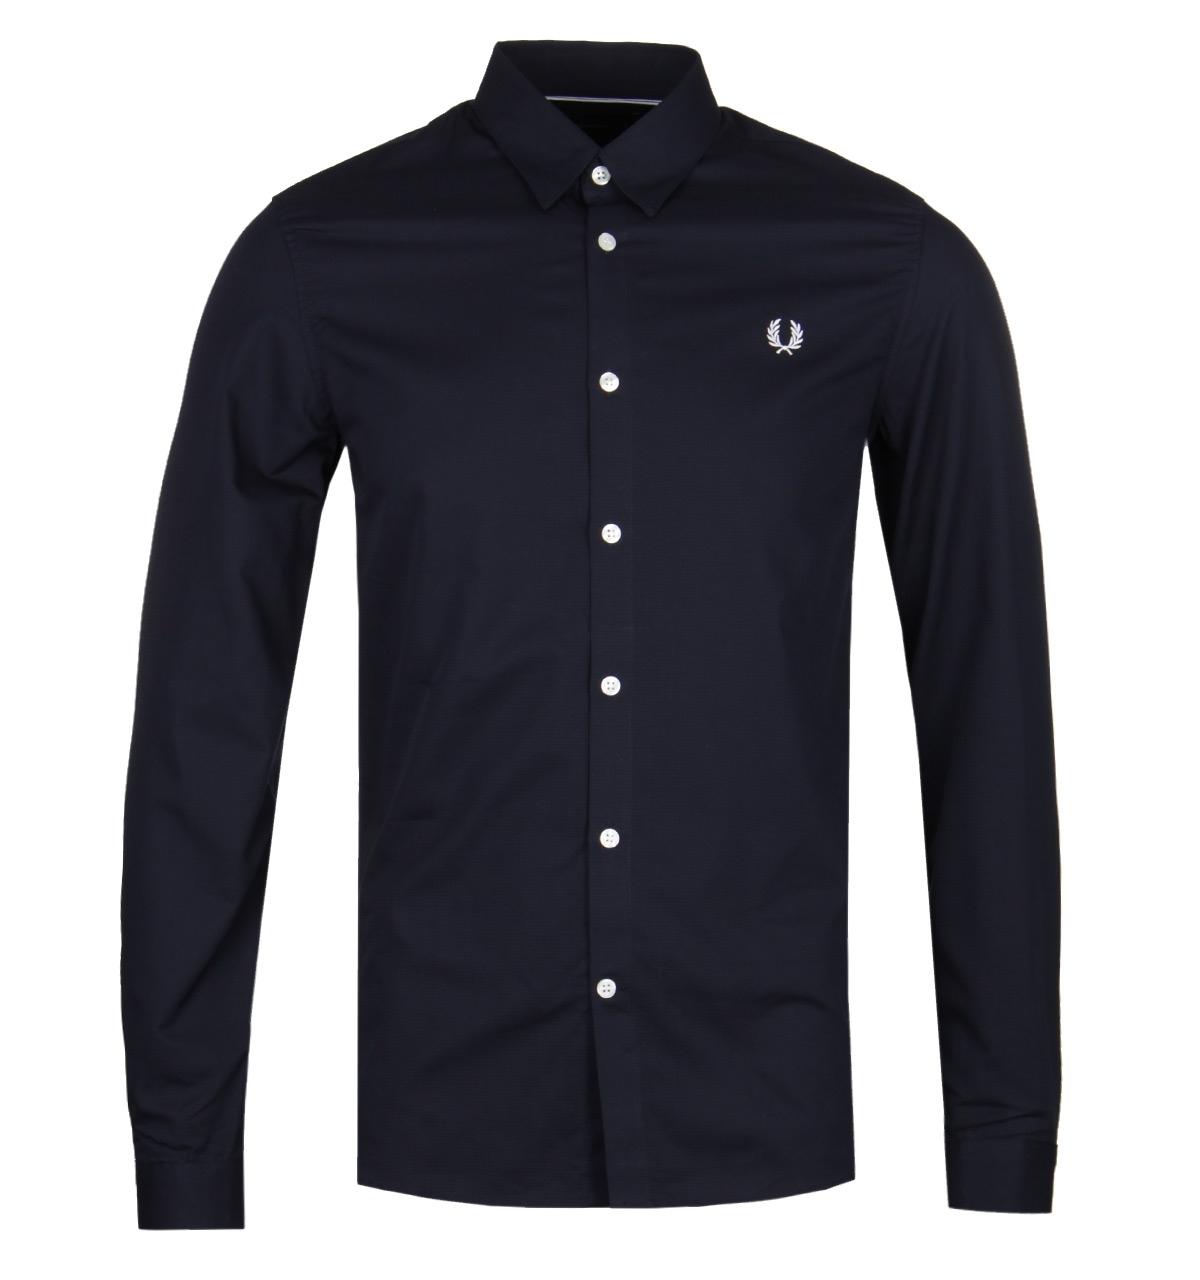 Fred Perry Button Down Navy Shirt in Blue for Men - Lyst